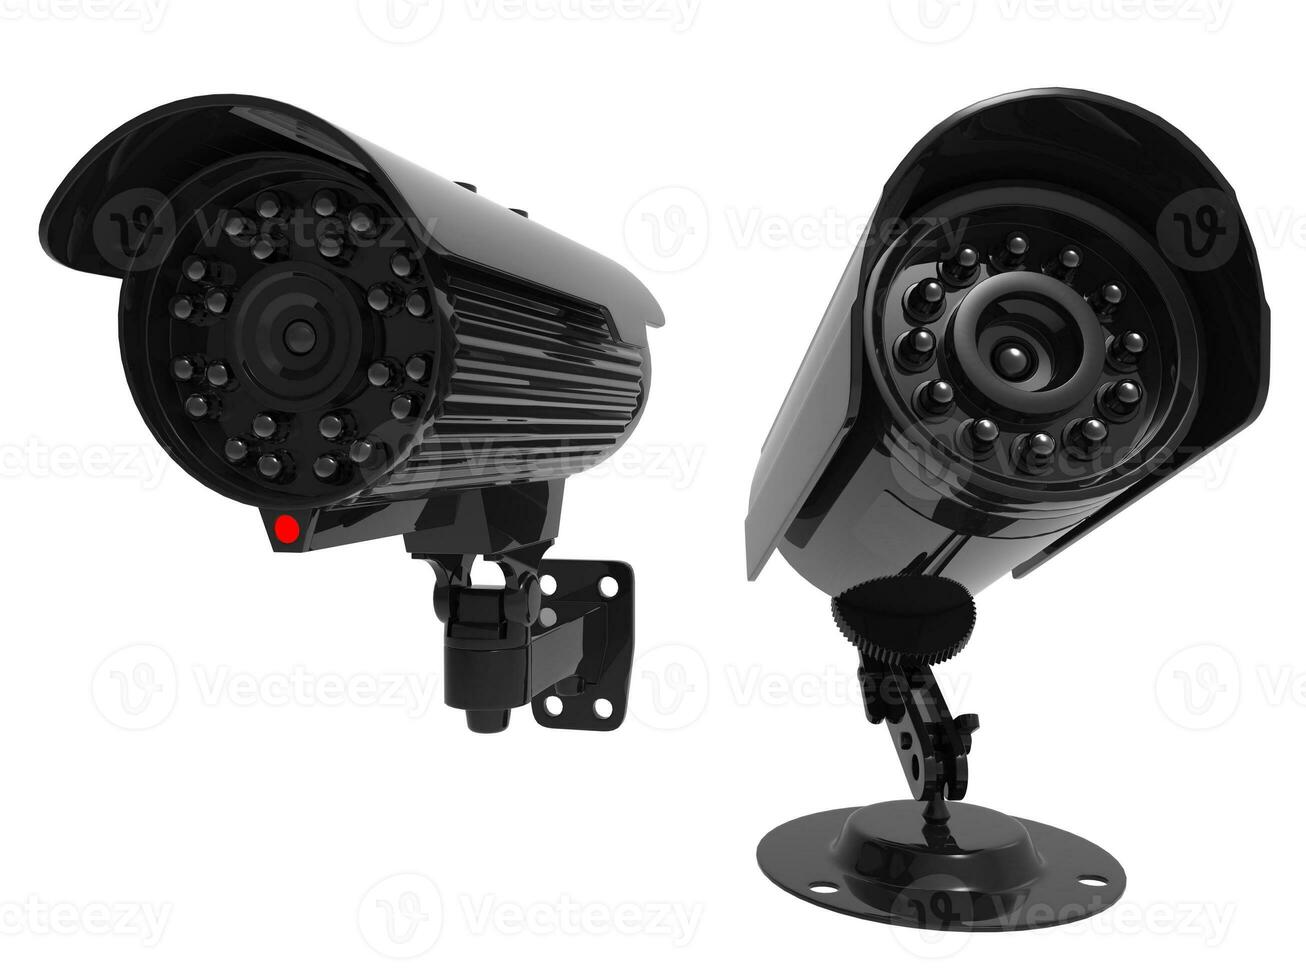 Security cameras with night vision photo